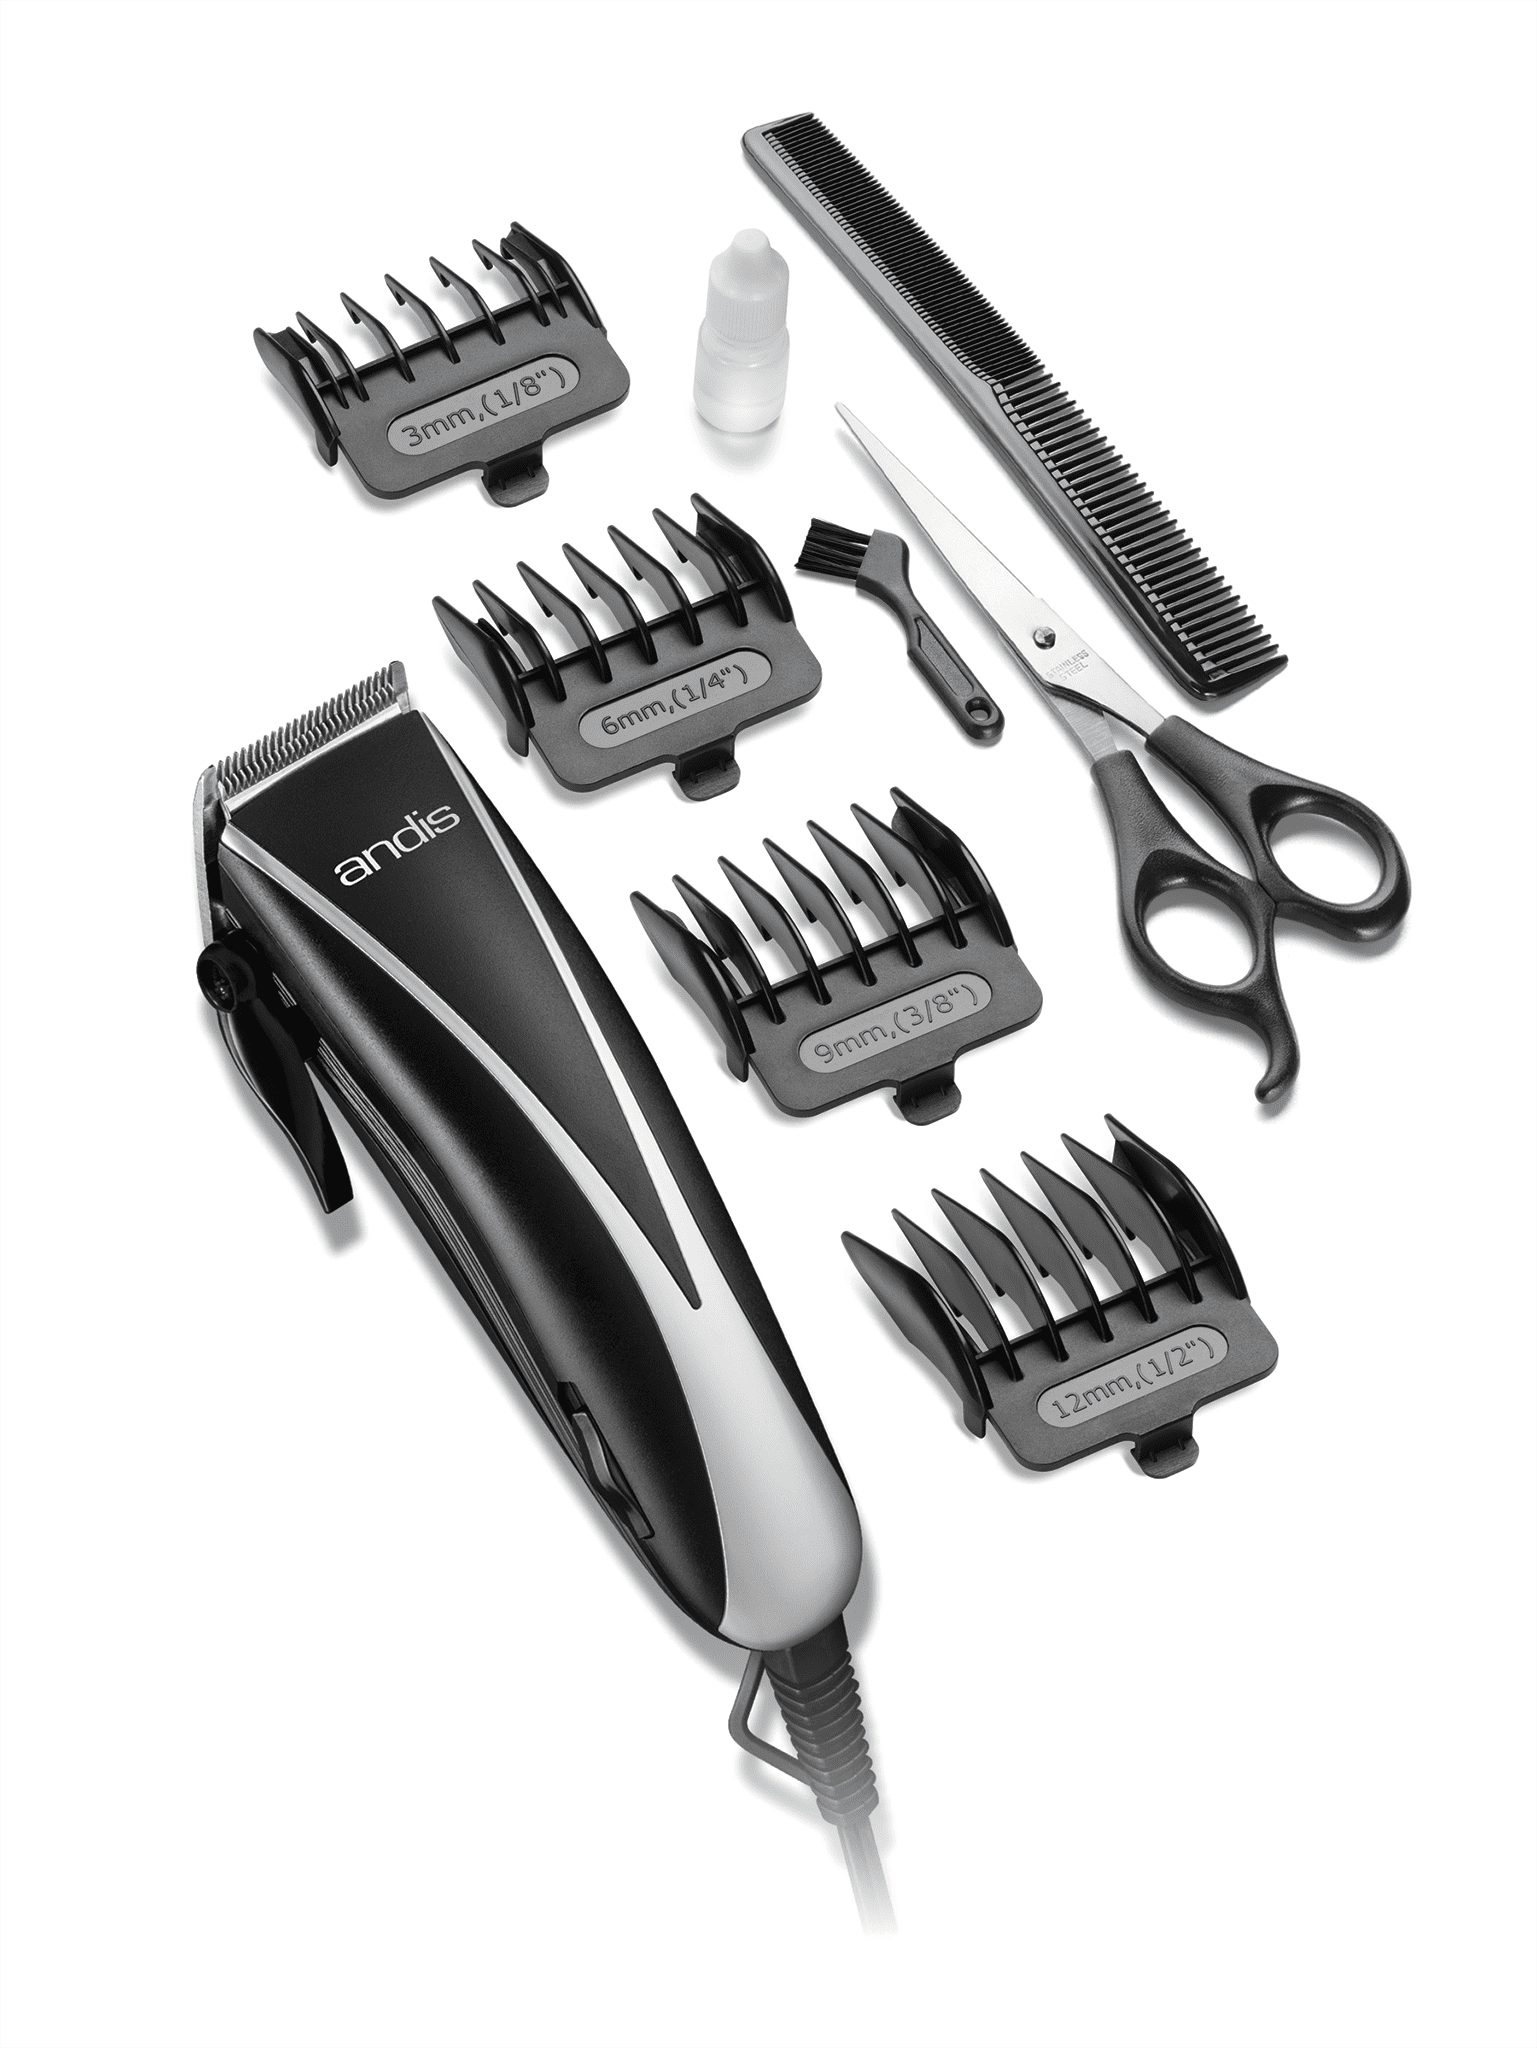 andis hair clipper kit